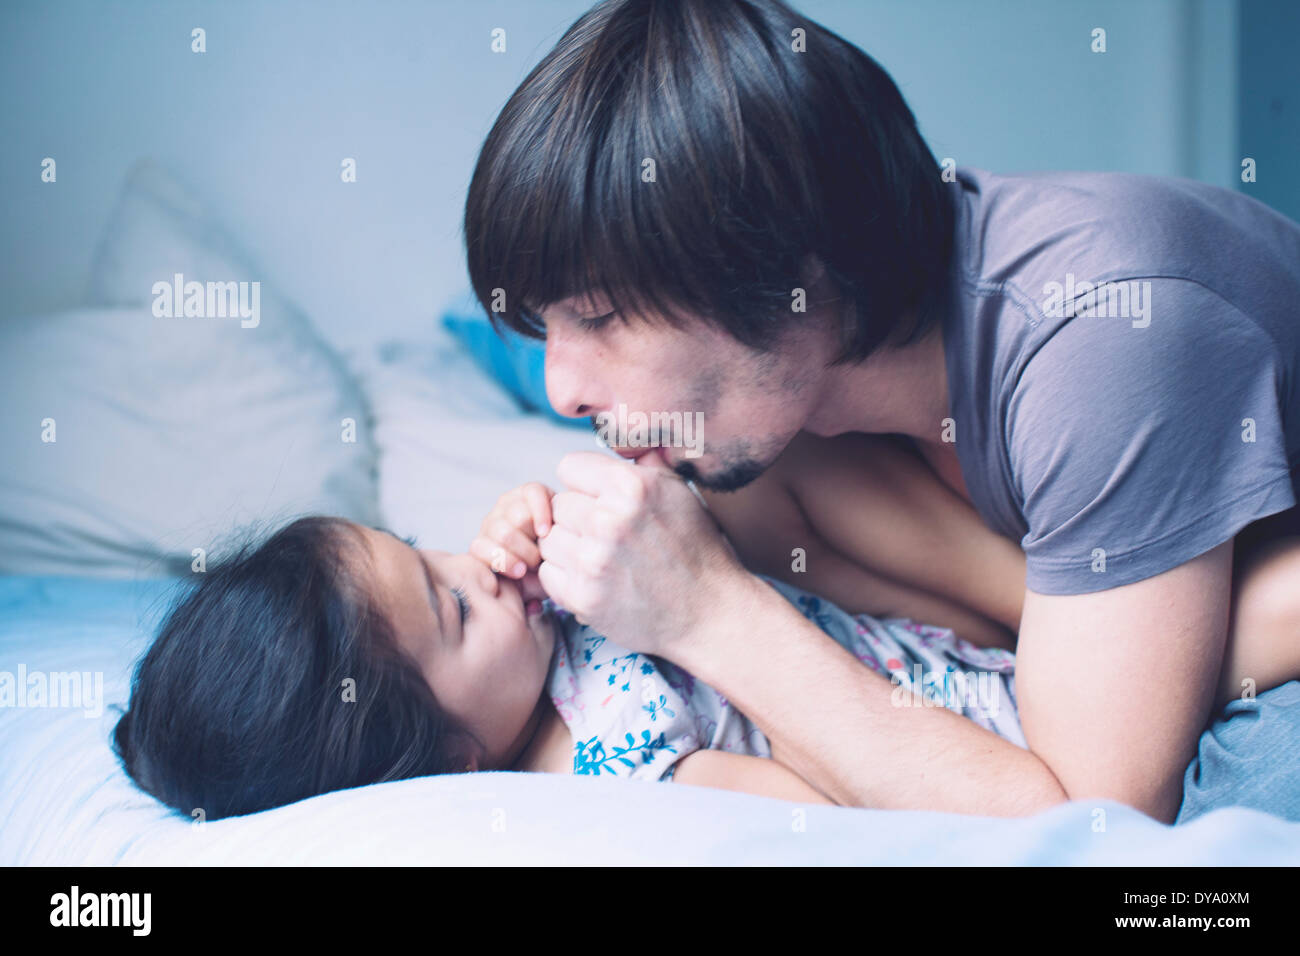 Father spending quality time with young daughter Stock Photo